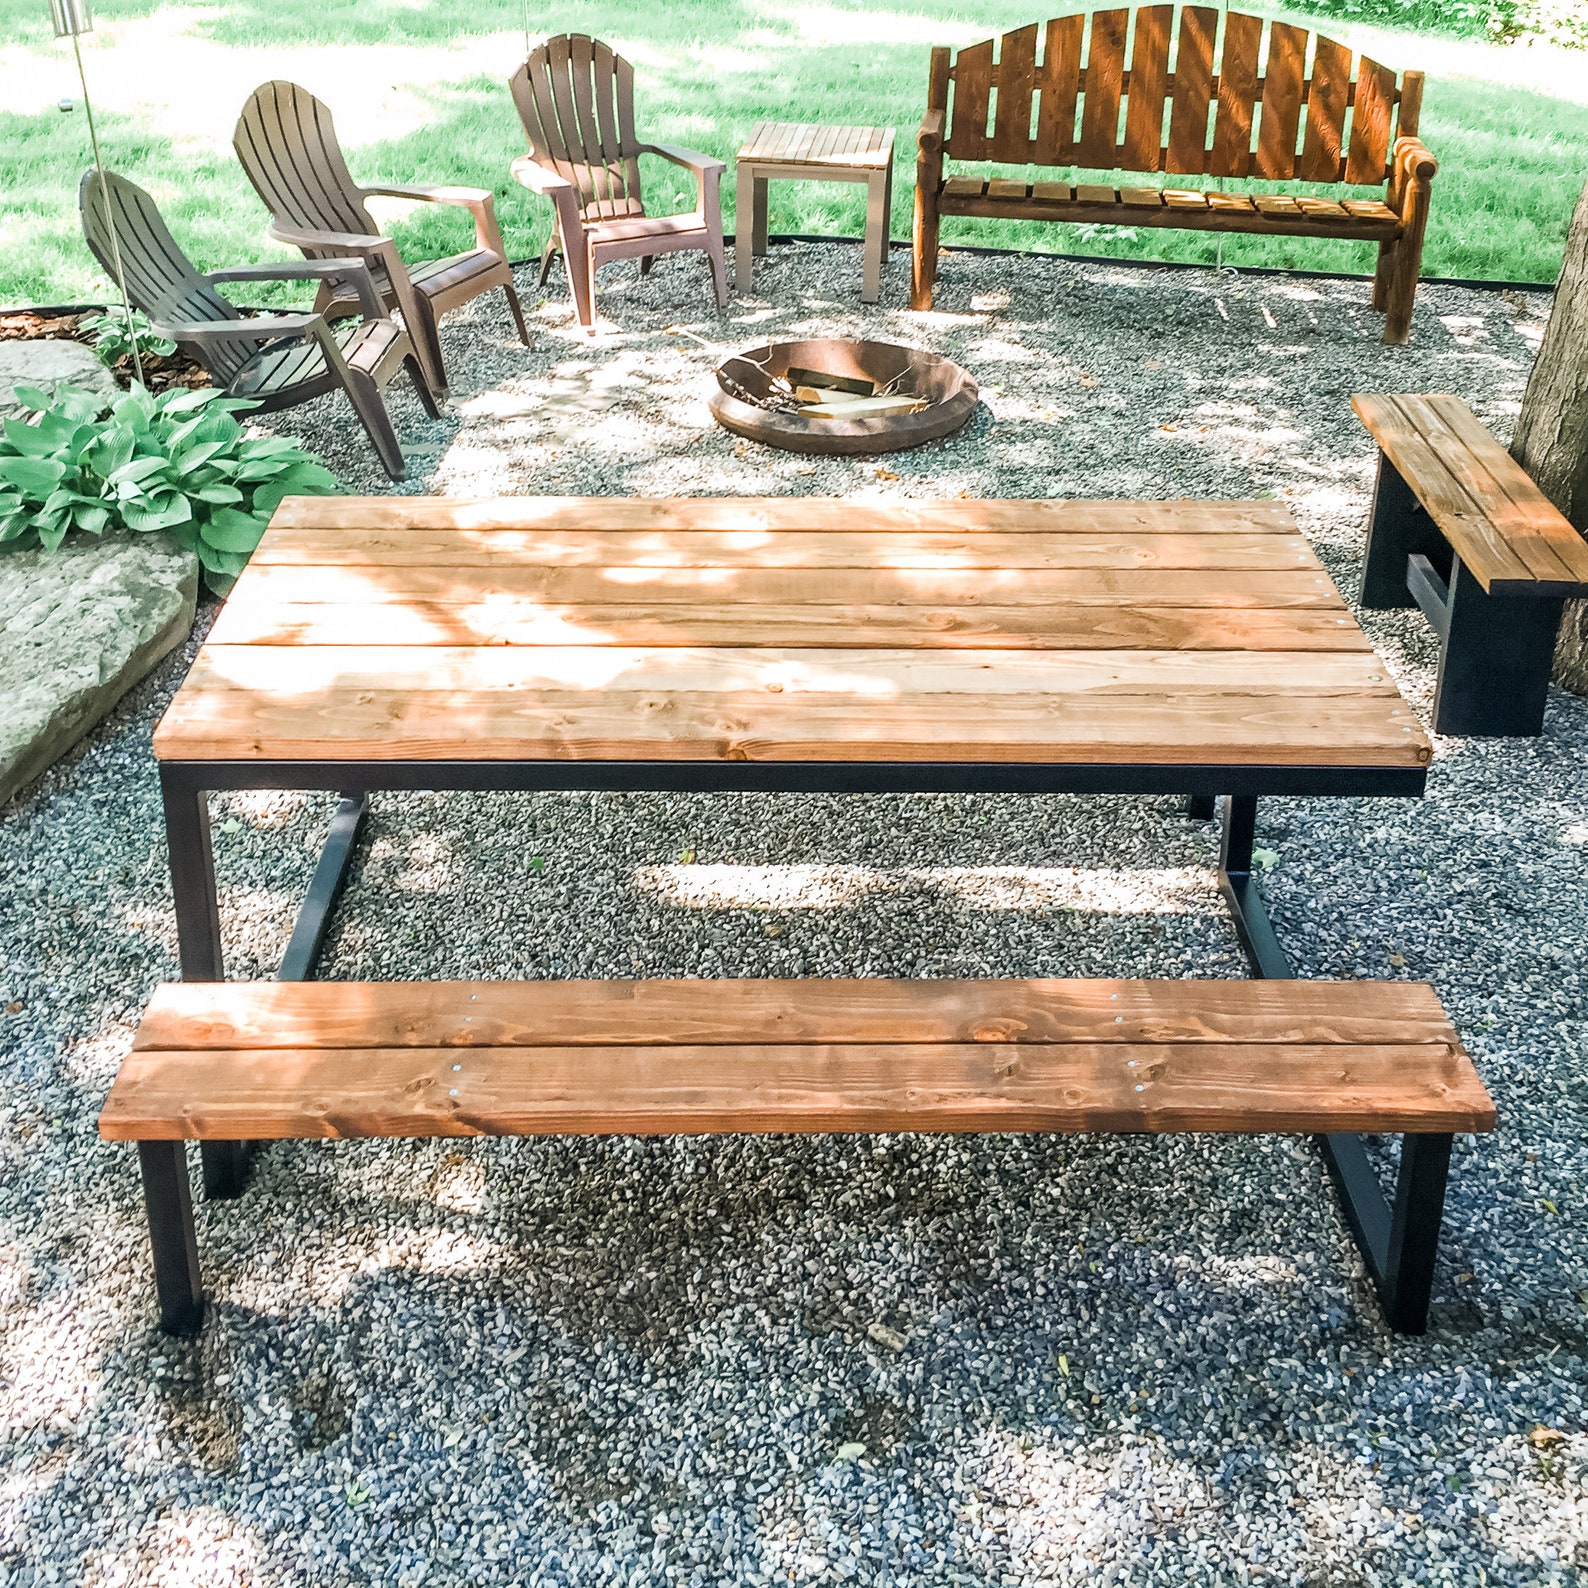 DIY Modern Industrial Picnic Table Plans 6ft Steel and Wood - Etsy